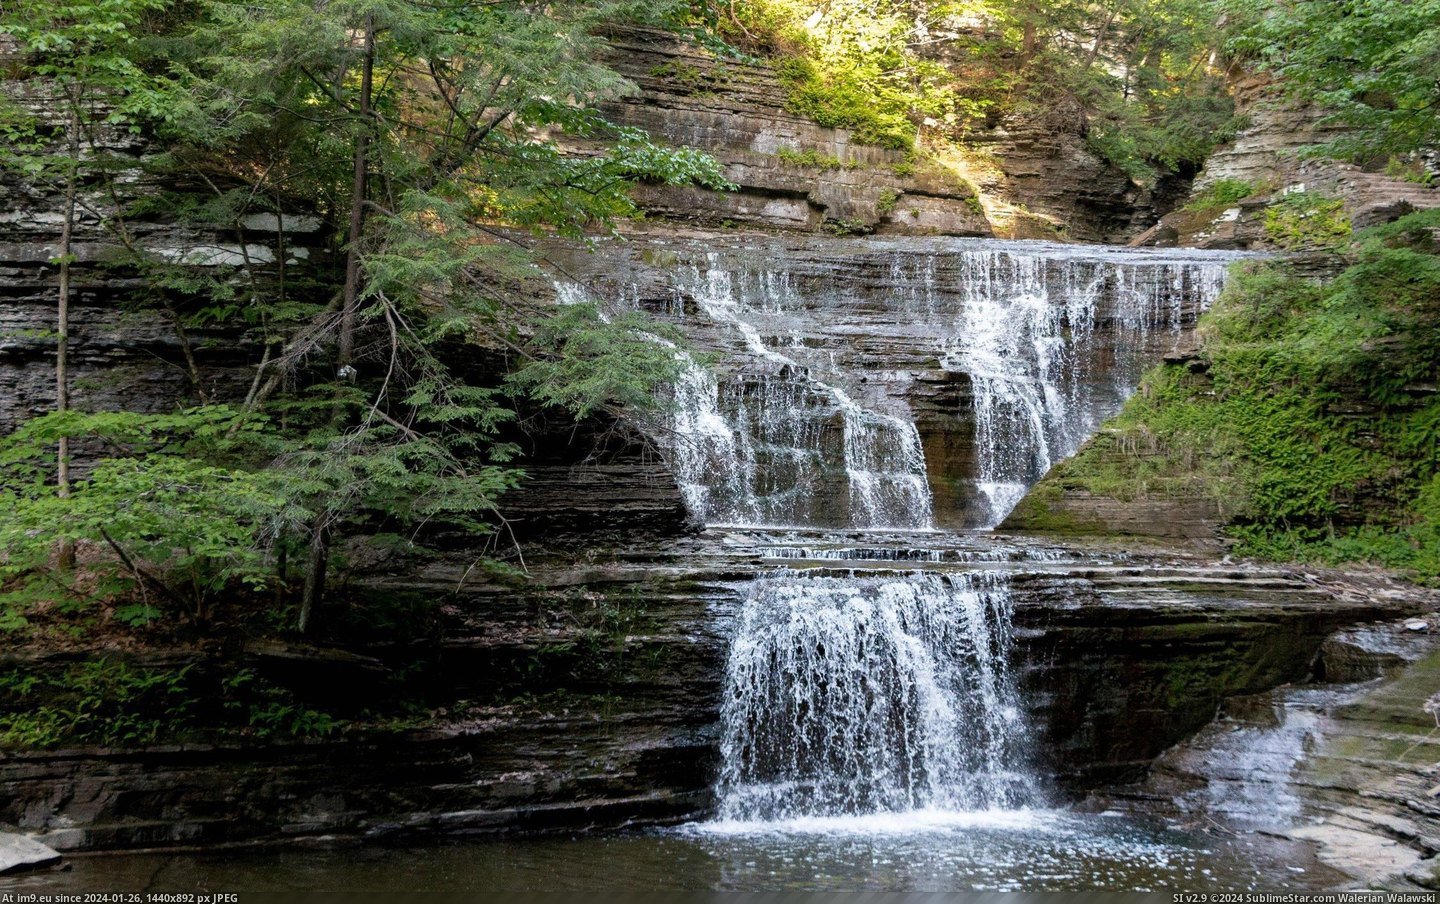 #Park #State #Summertime #Falls #York [Earthporn] Summertime at Buttermilk Falls State Park in New York [2250x1406] Pic. (Image of album My r/EARTHPORN favs))